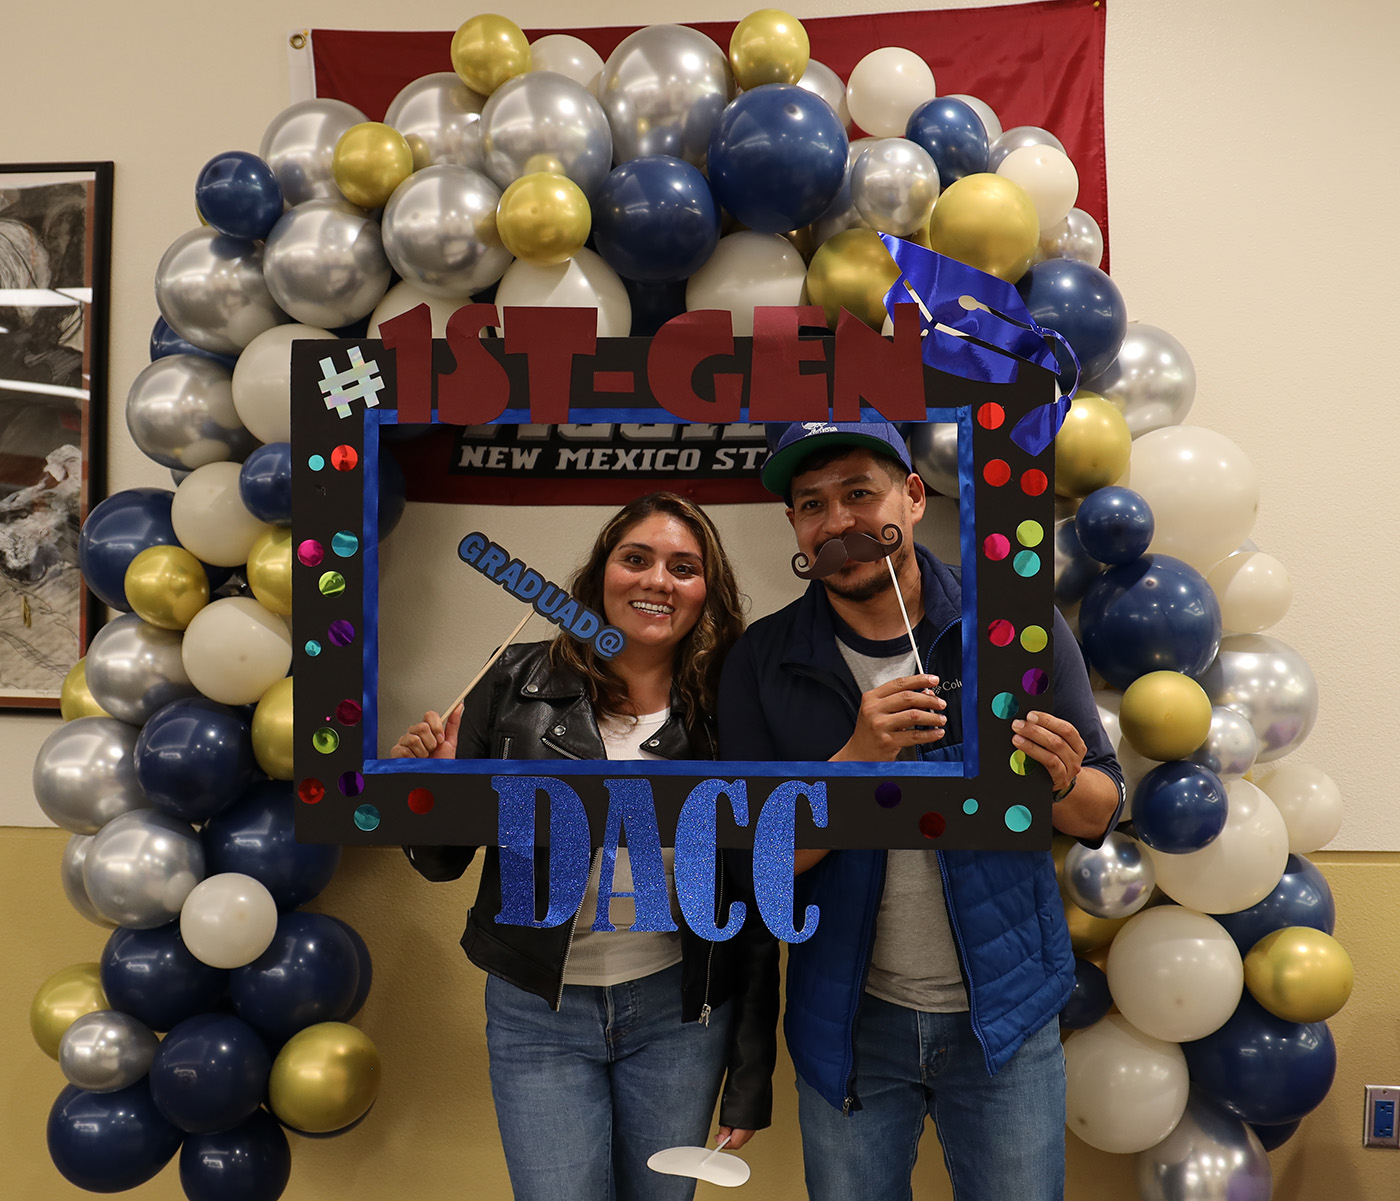 A pair surrounded by ballons in celebration of DACC.